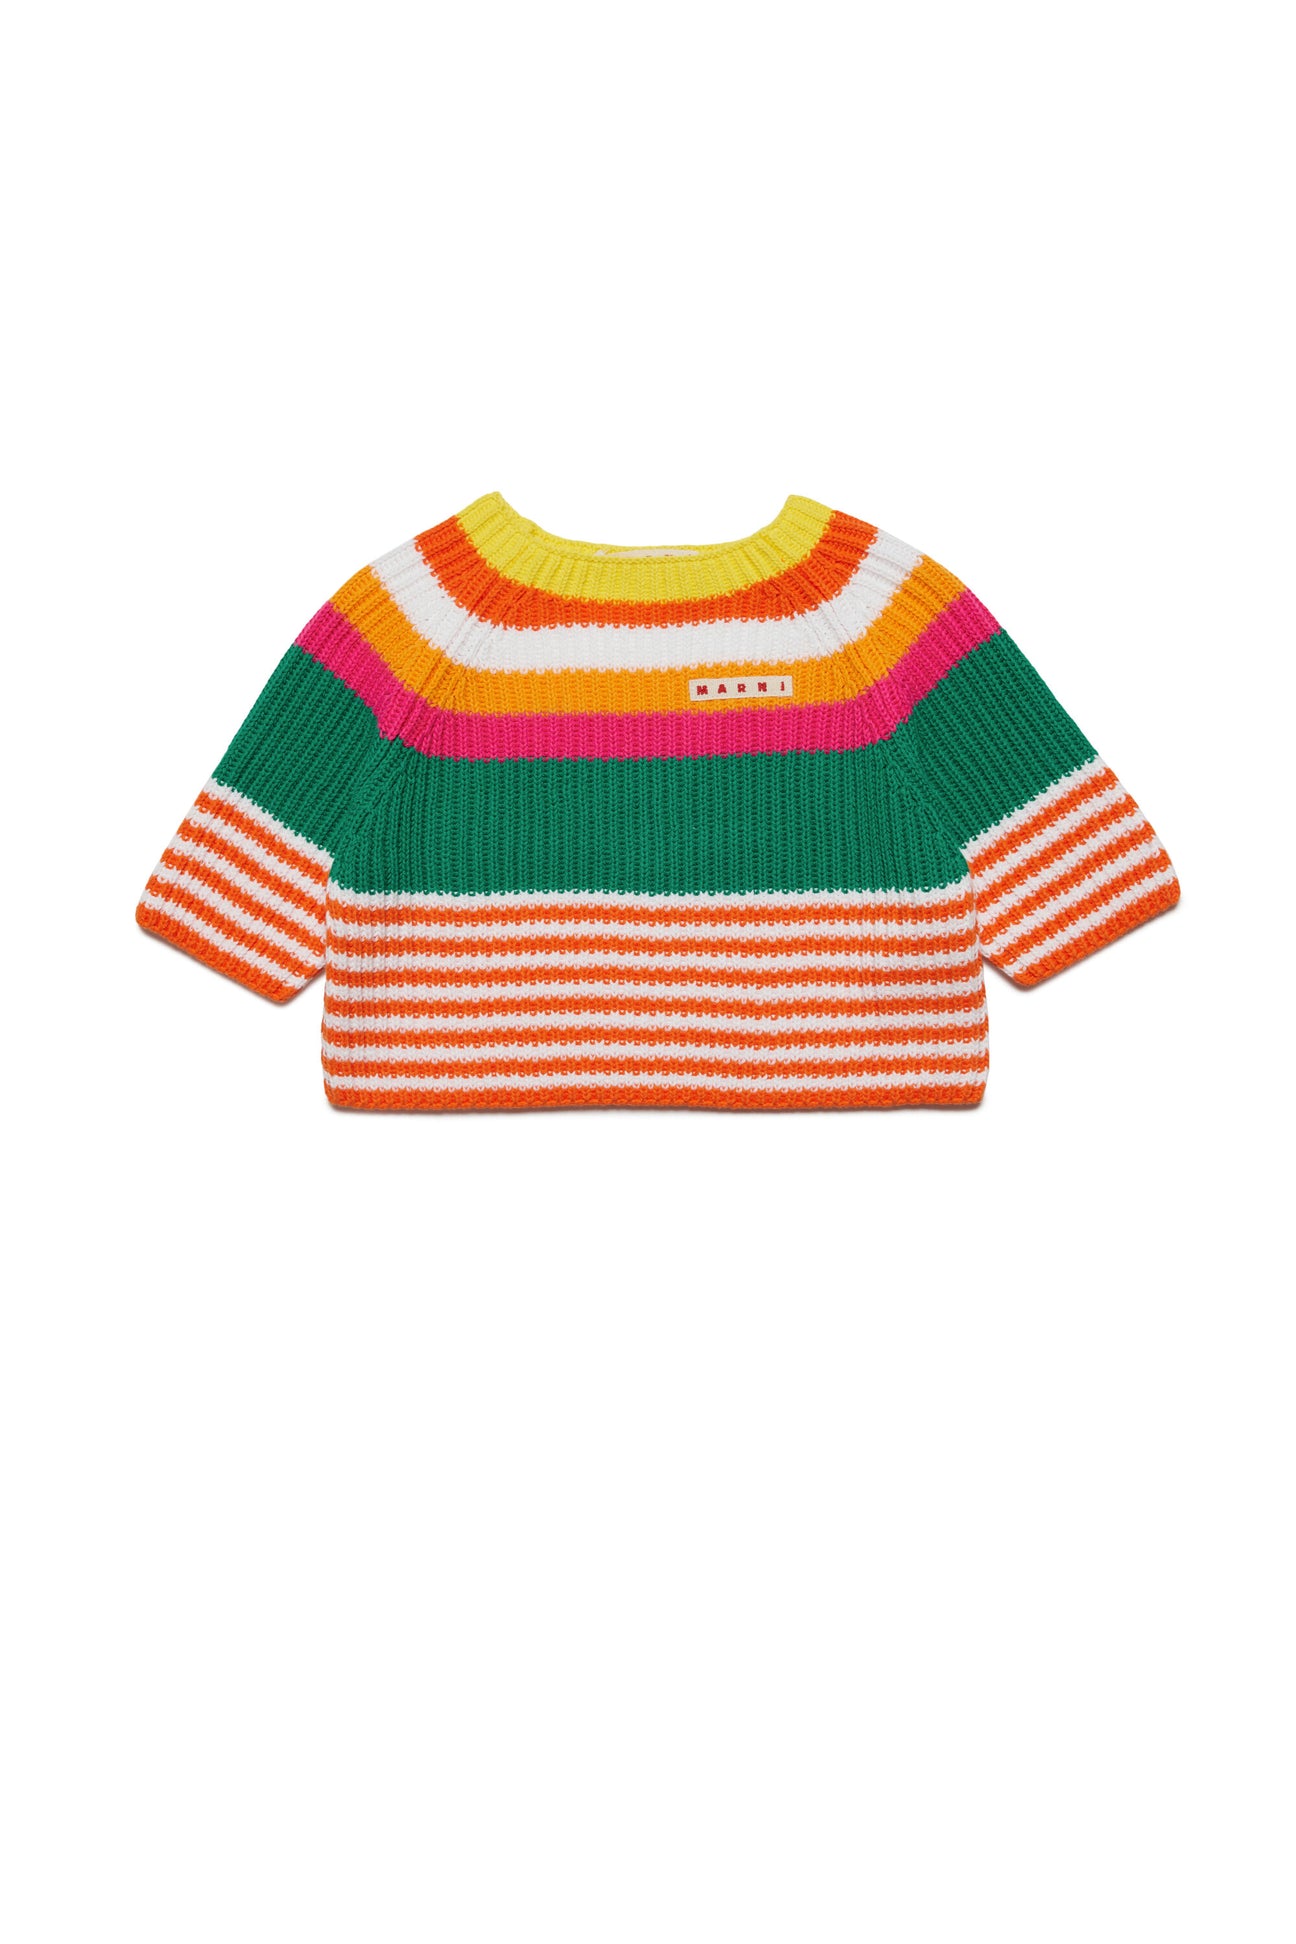 English striped knit pullover English striped knit pullover